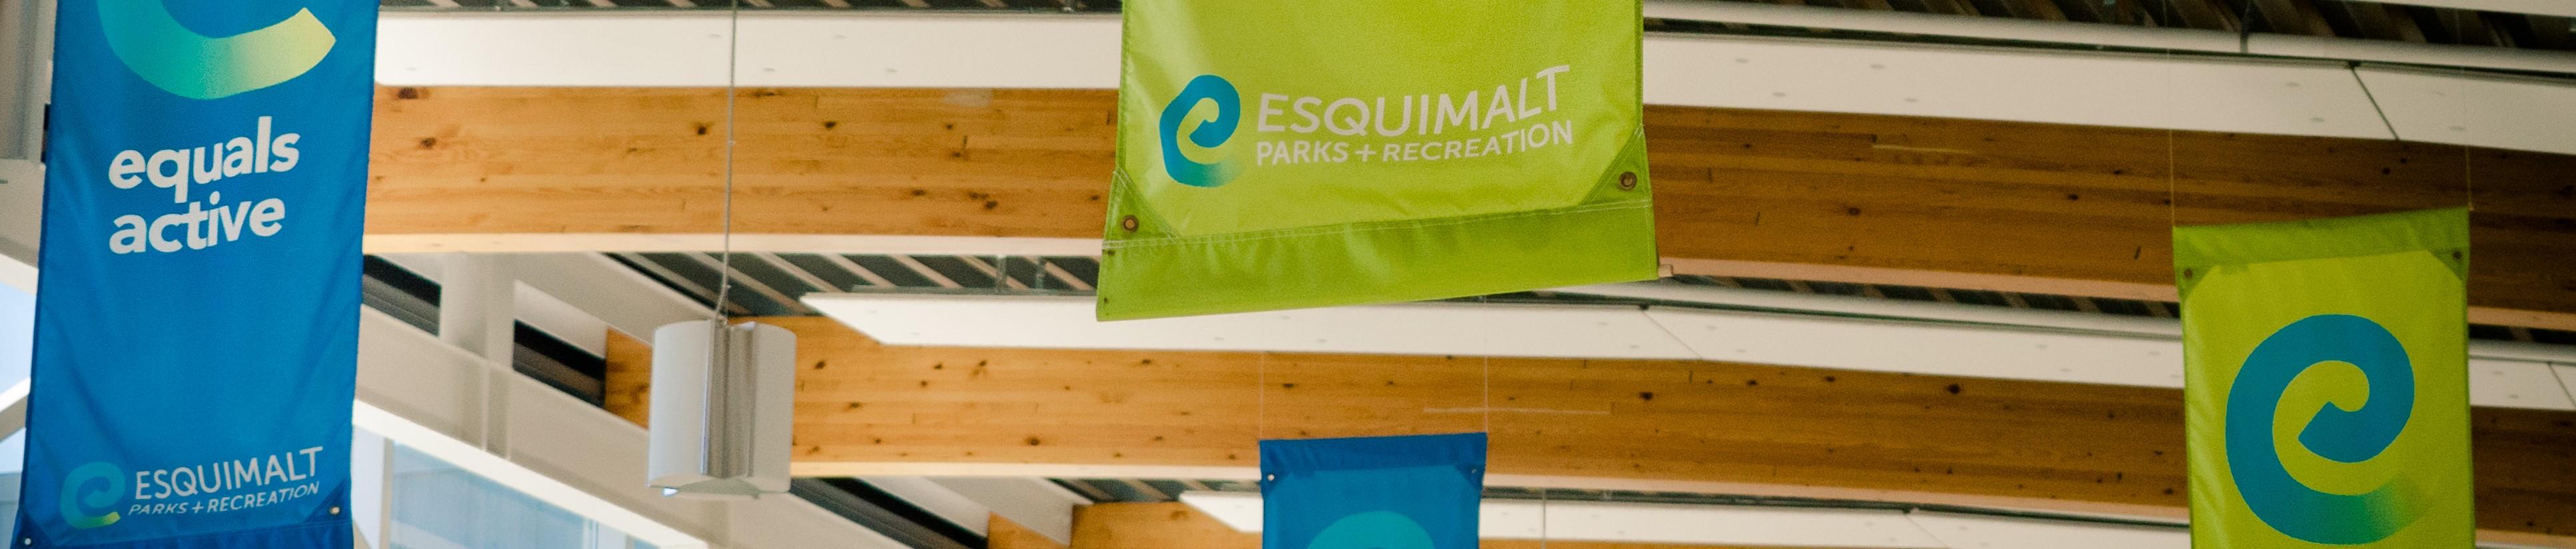 Esquimalt recreation banners hanging from the ceiling